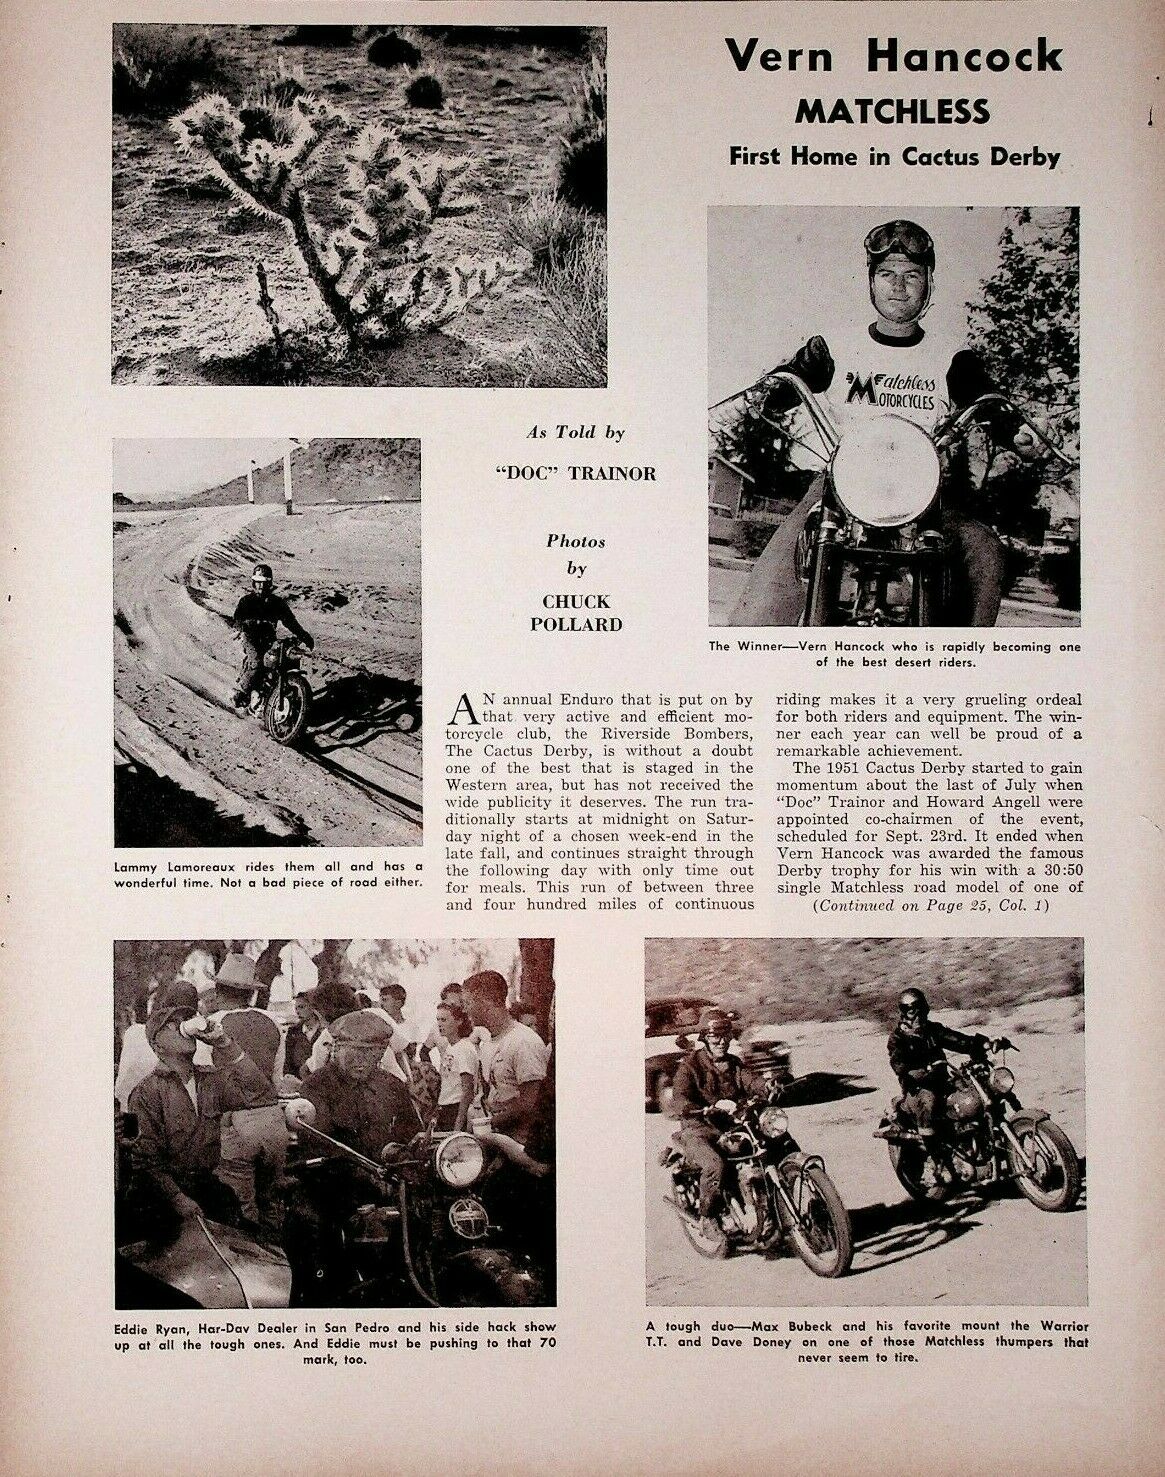 1951 Vern Hancock Matchless Cactus Derby - 2-page Vintage Motorcycle Article